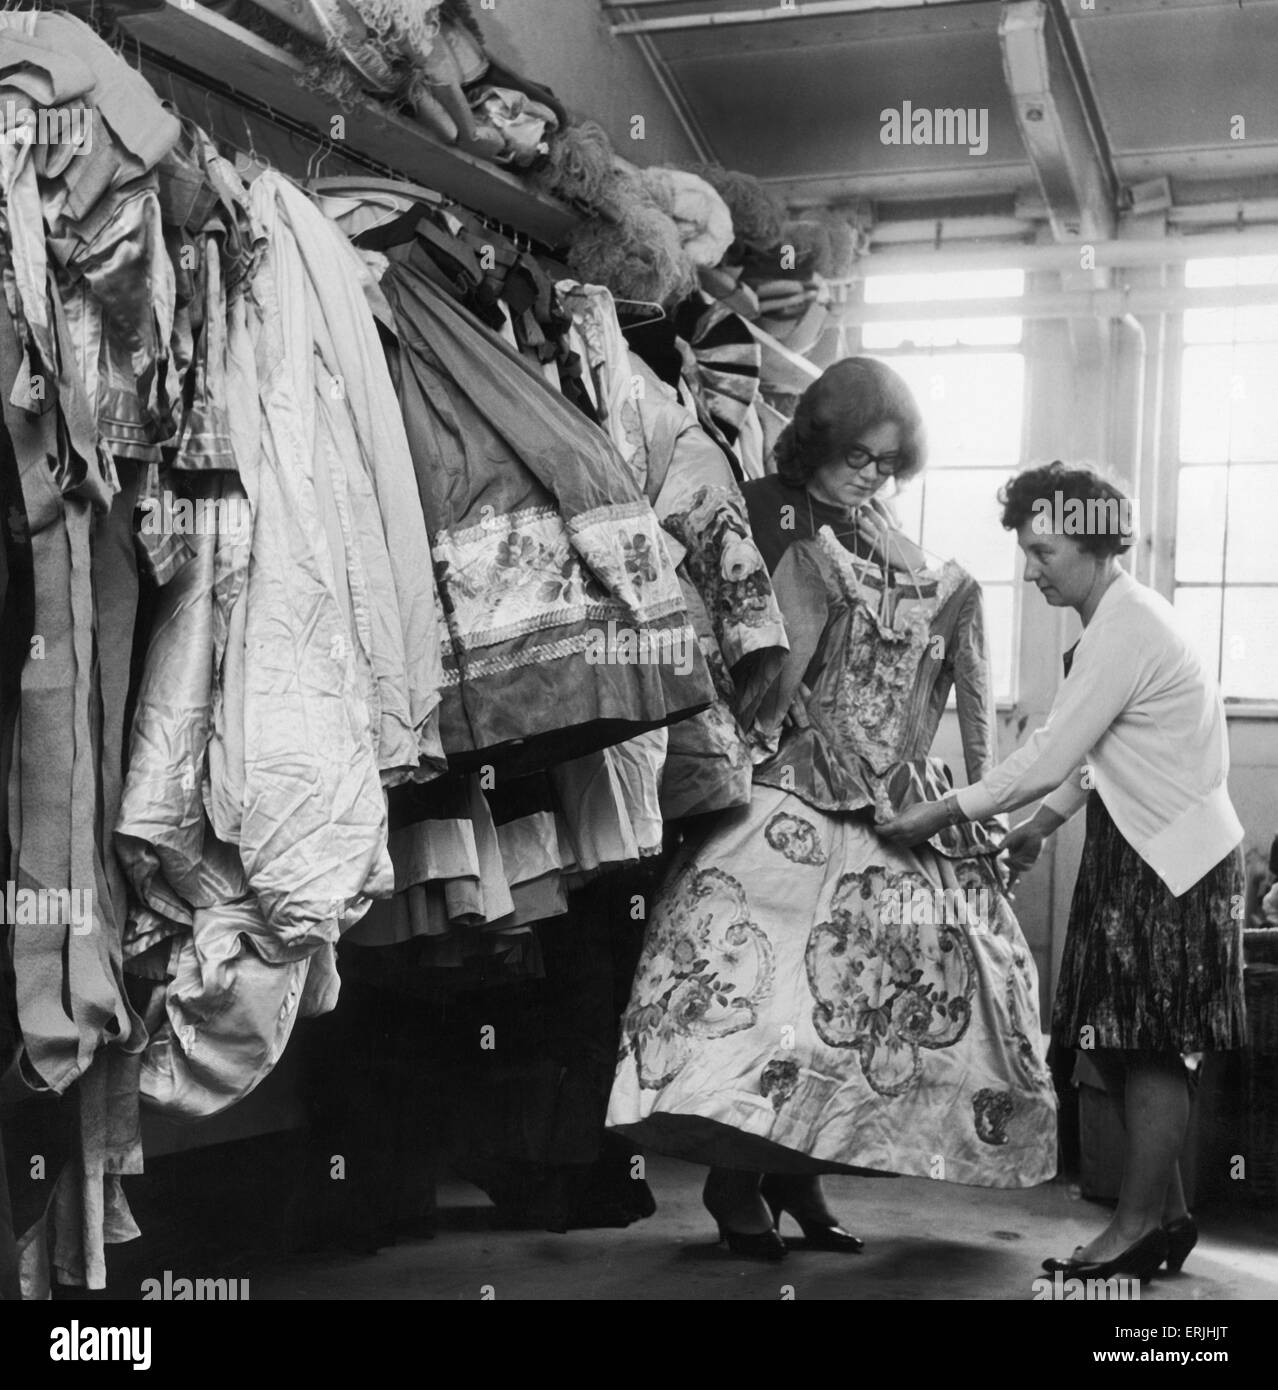 Miss Frances Roe wardrobe supervisor at the Coventry Theatre holds one of 10,000 costumes held by the wardrobe department, while her assistant Eunice Jenkins inspects the dress for damage. 9th October 1954 Stock Photo